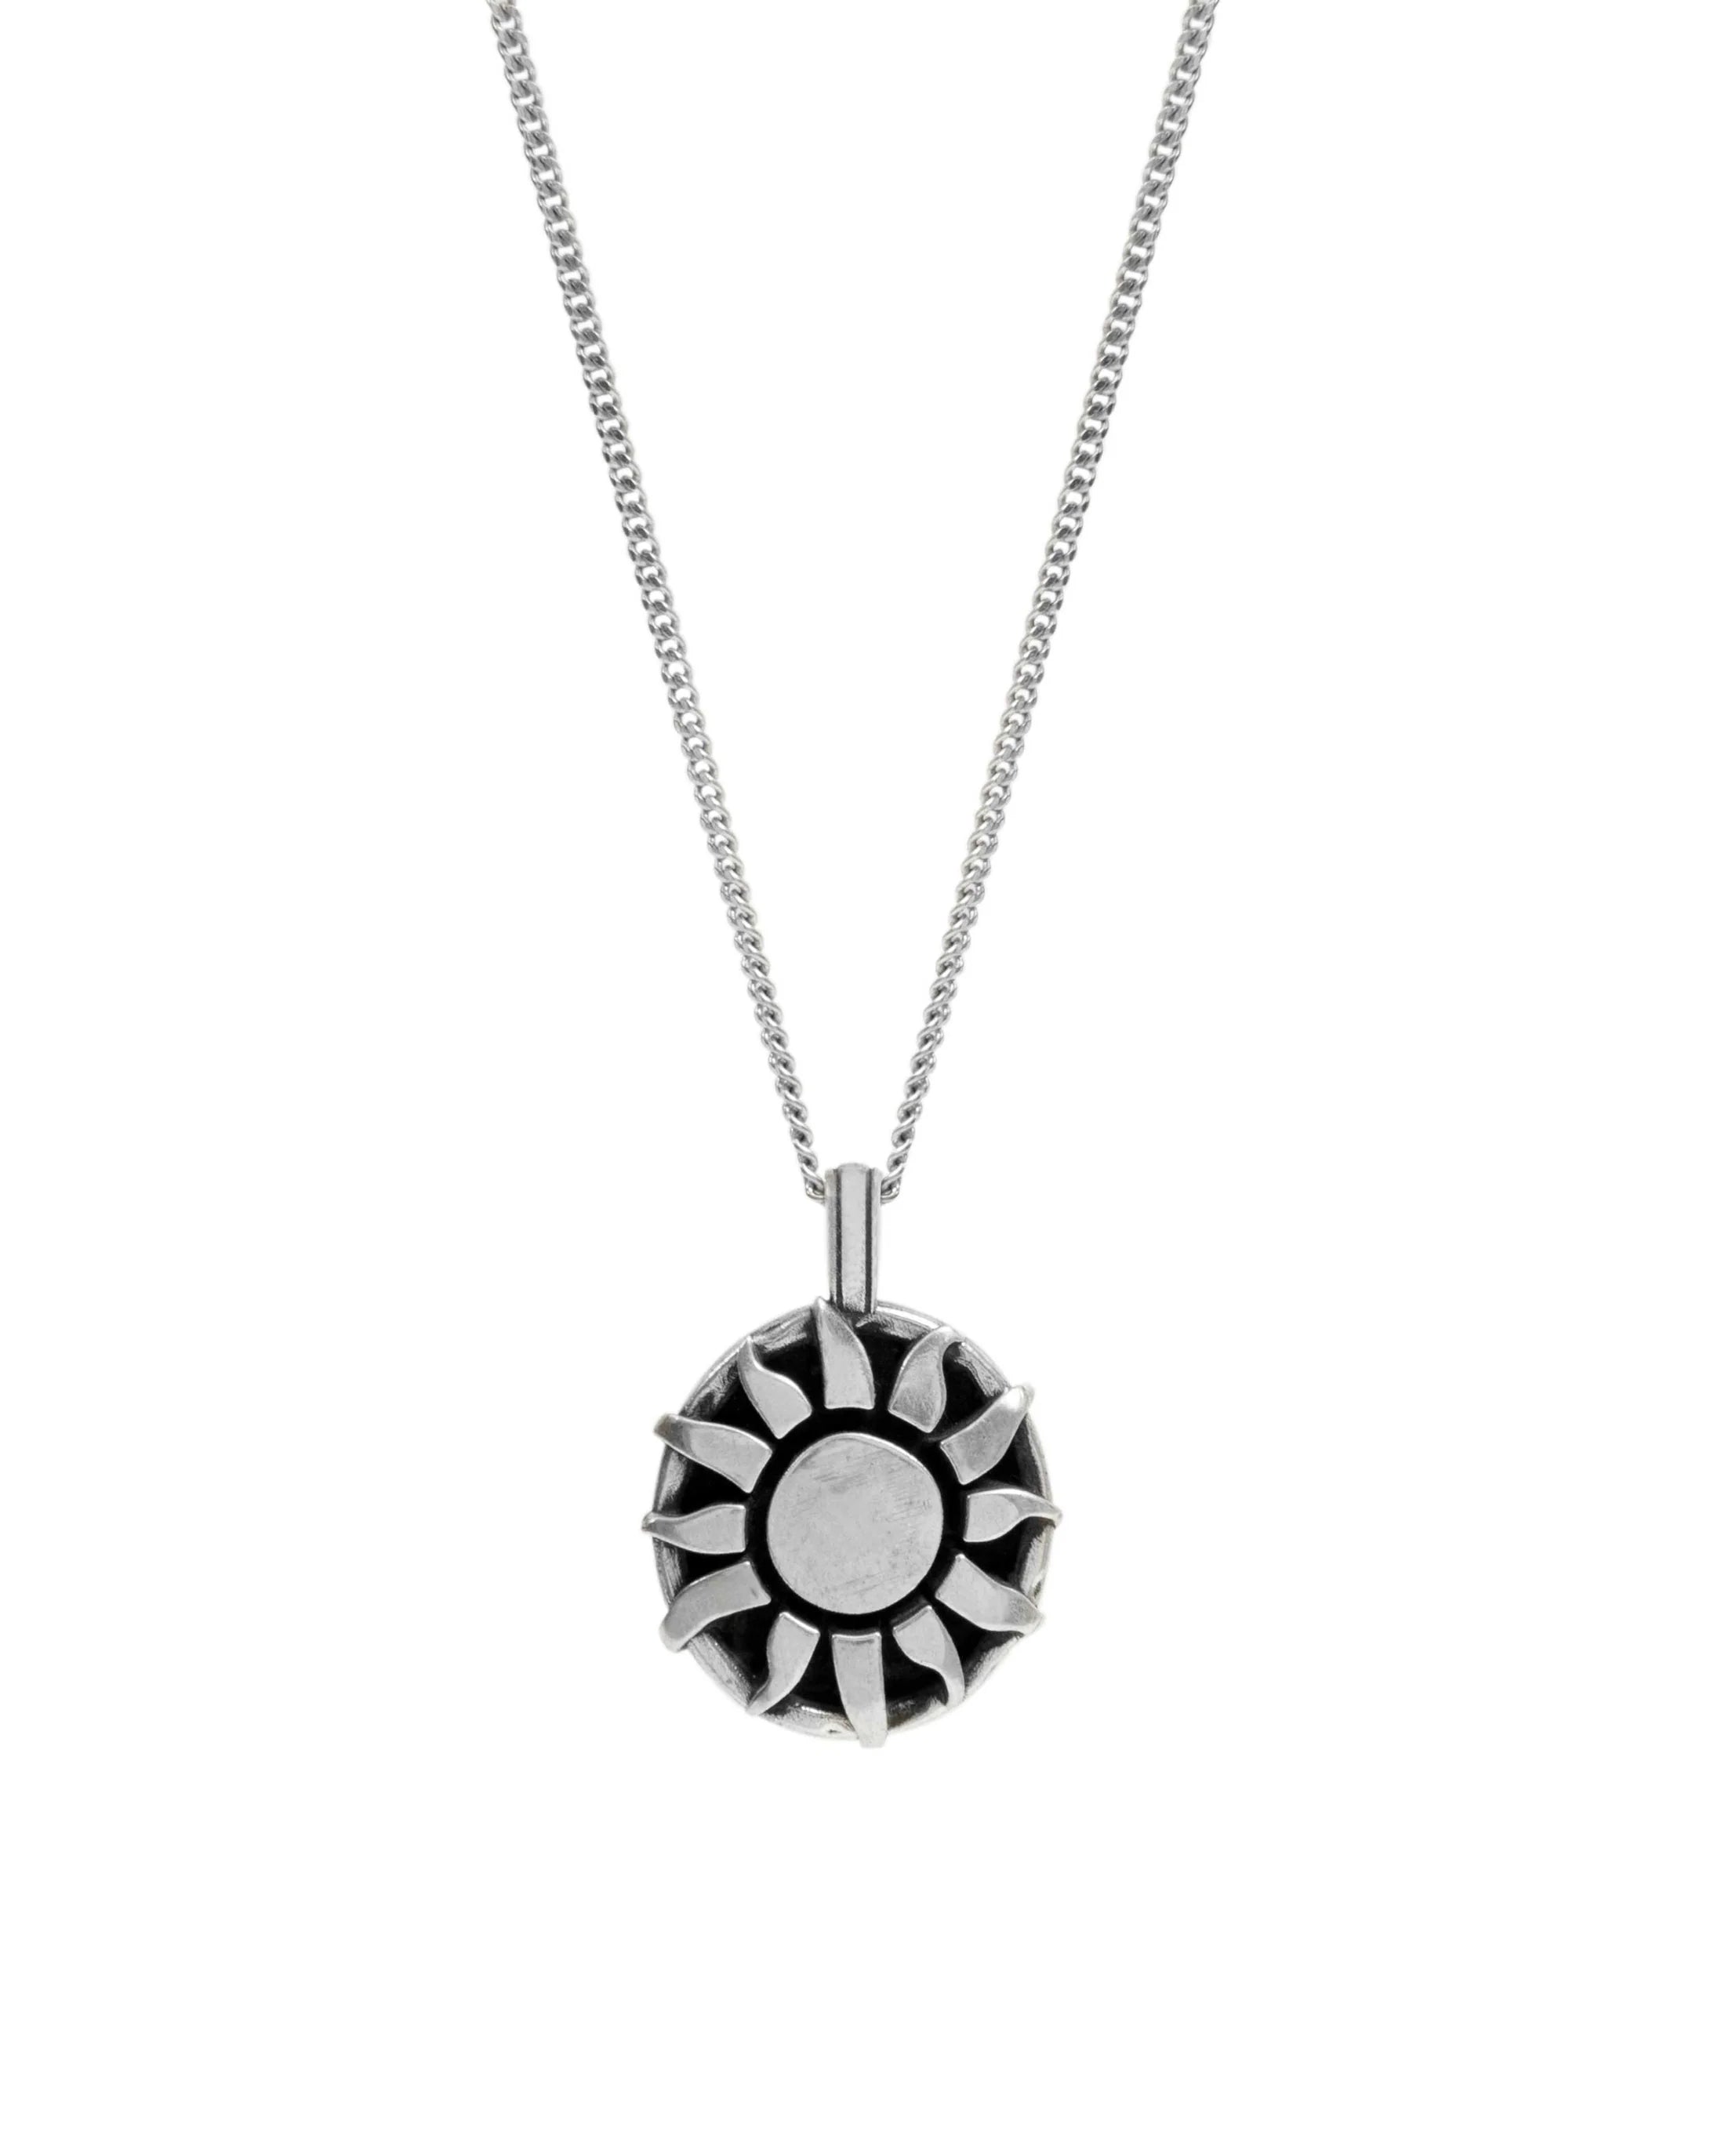 Endlessly Sun Necklace Silver